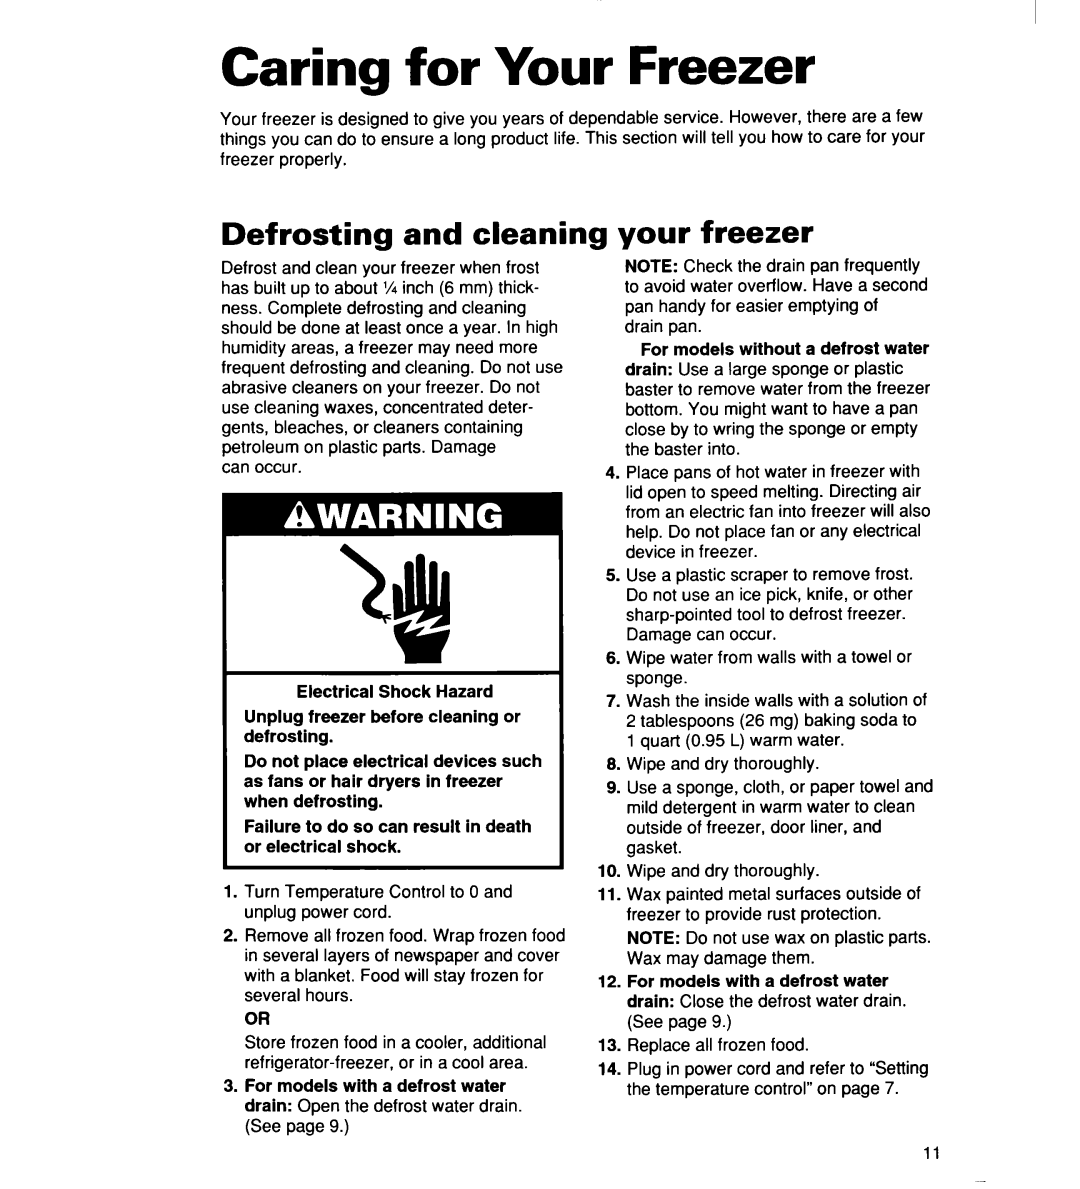 Whirlpool 2165306 warranty Caring for Your Freezer, Defrosting and cleaning, your freezer 